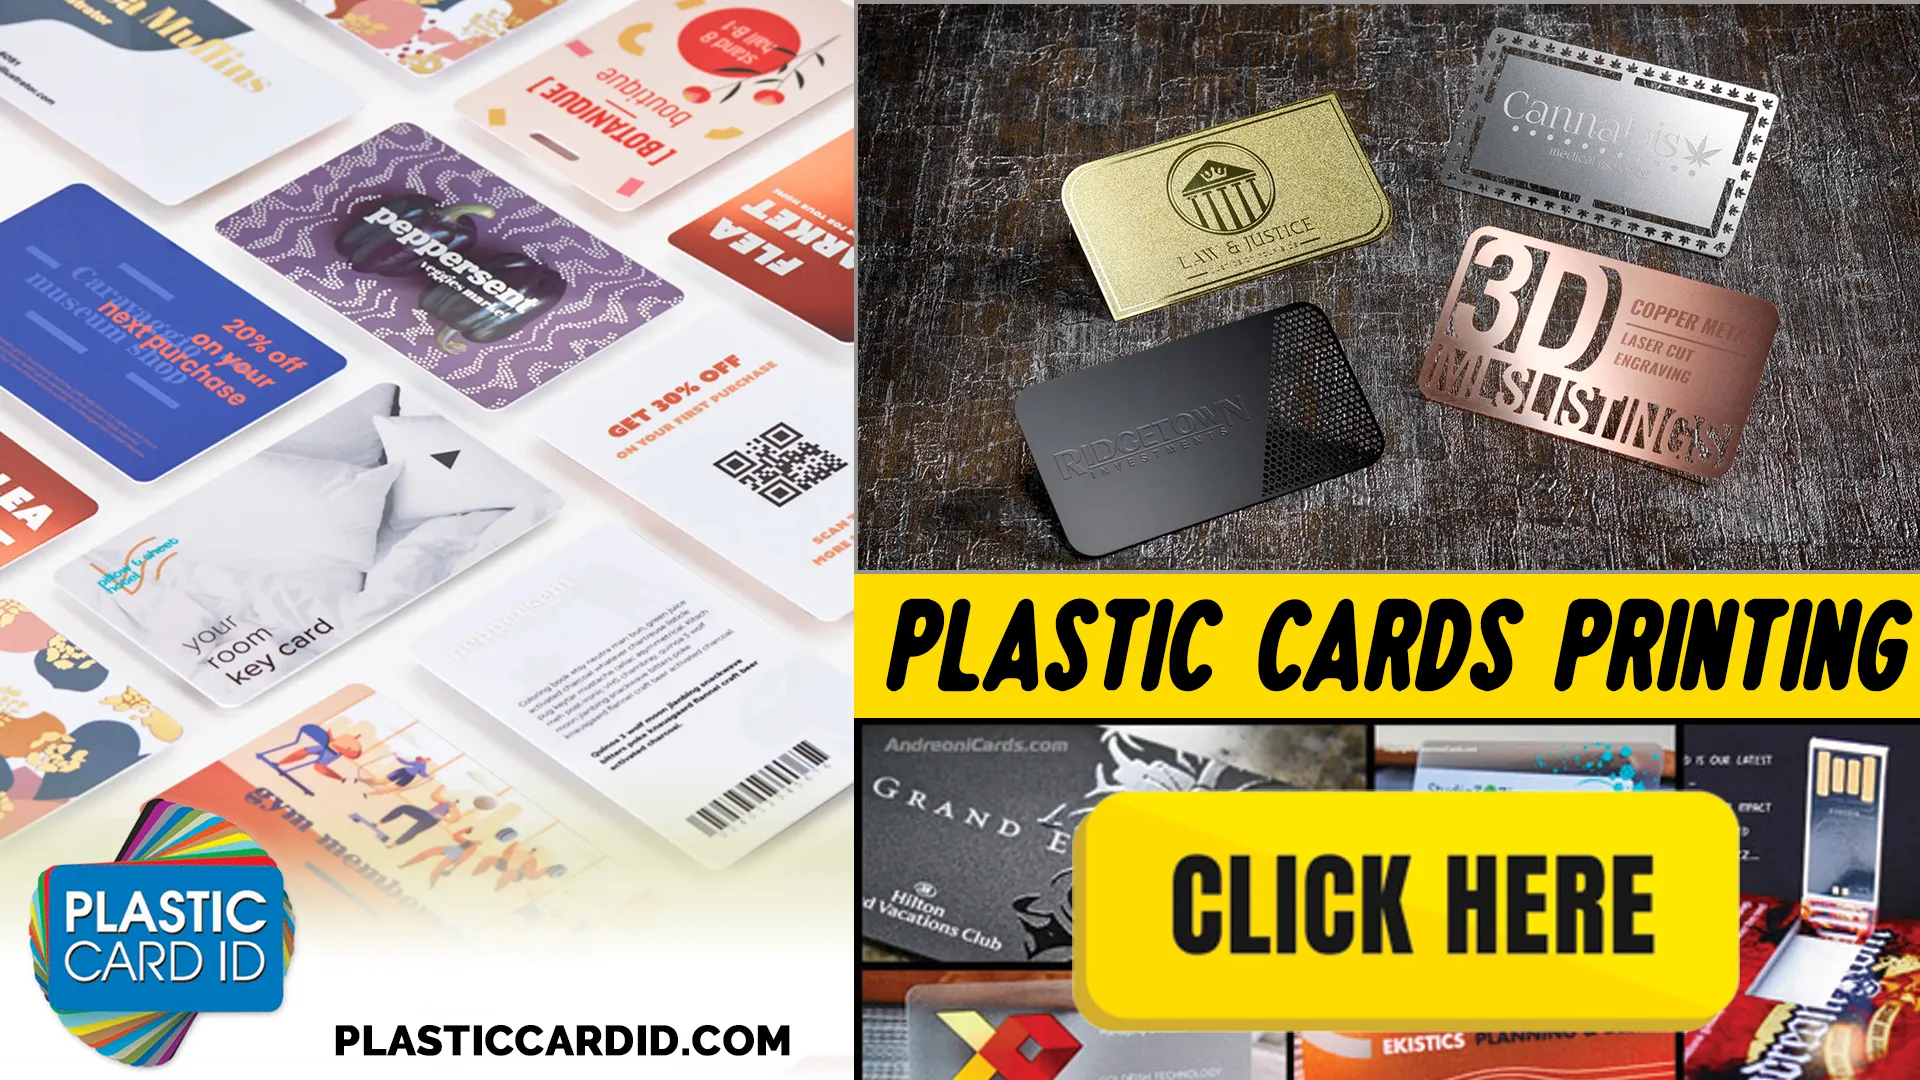 Optimal Conditions for Storing and Using Plastic Cards